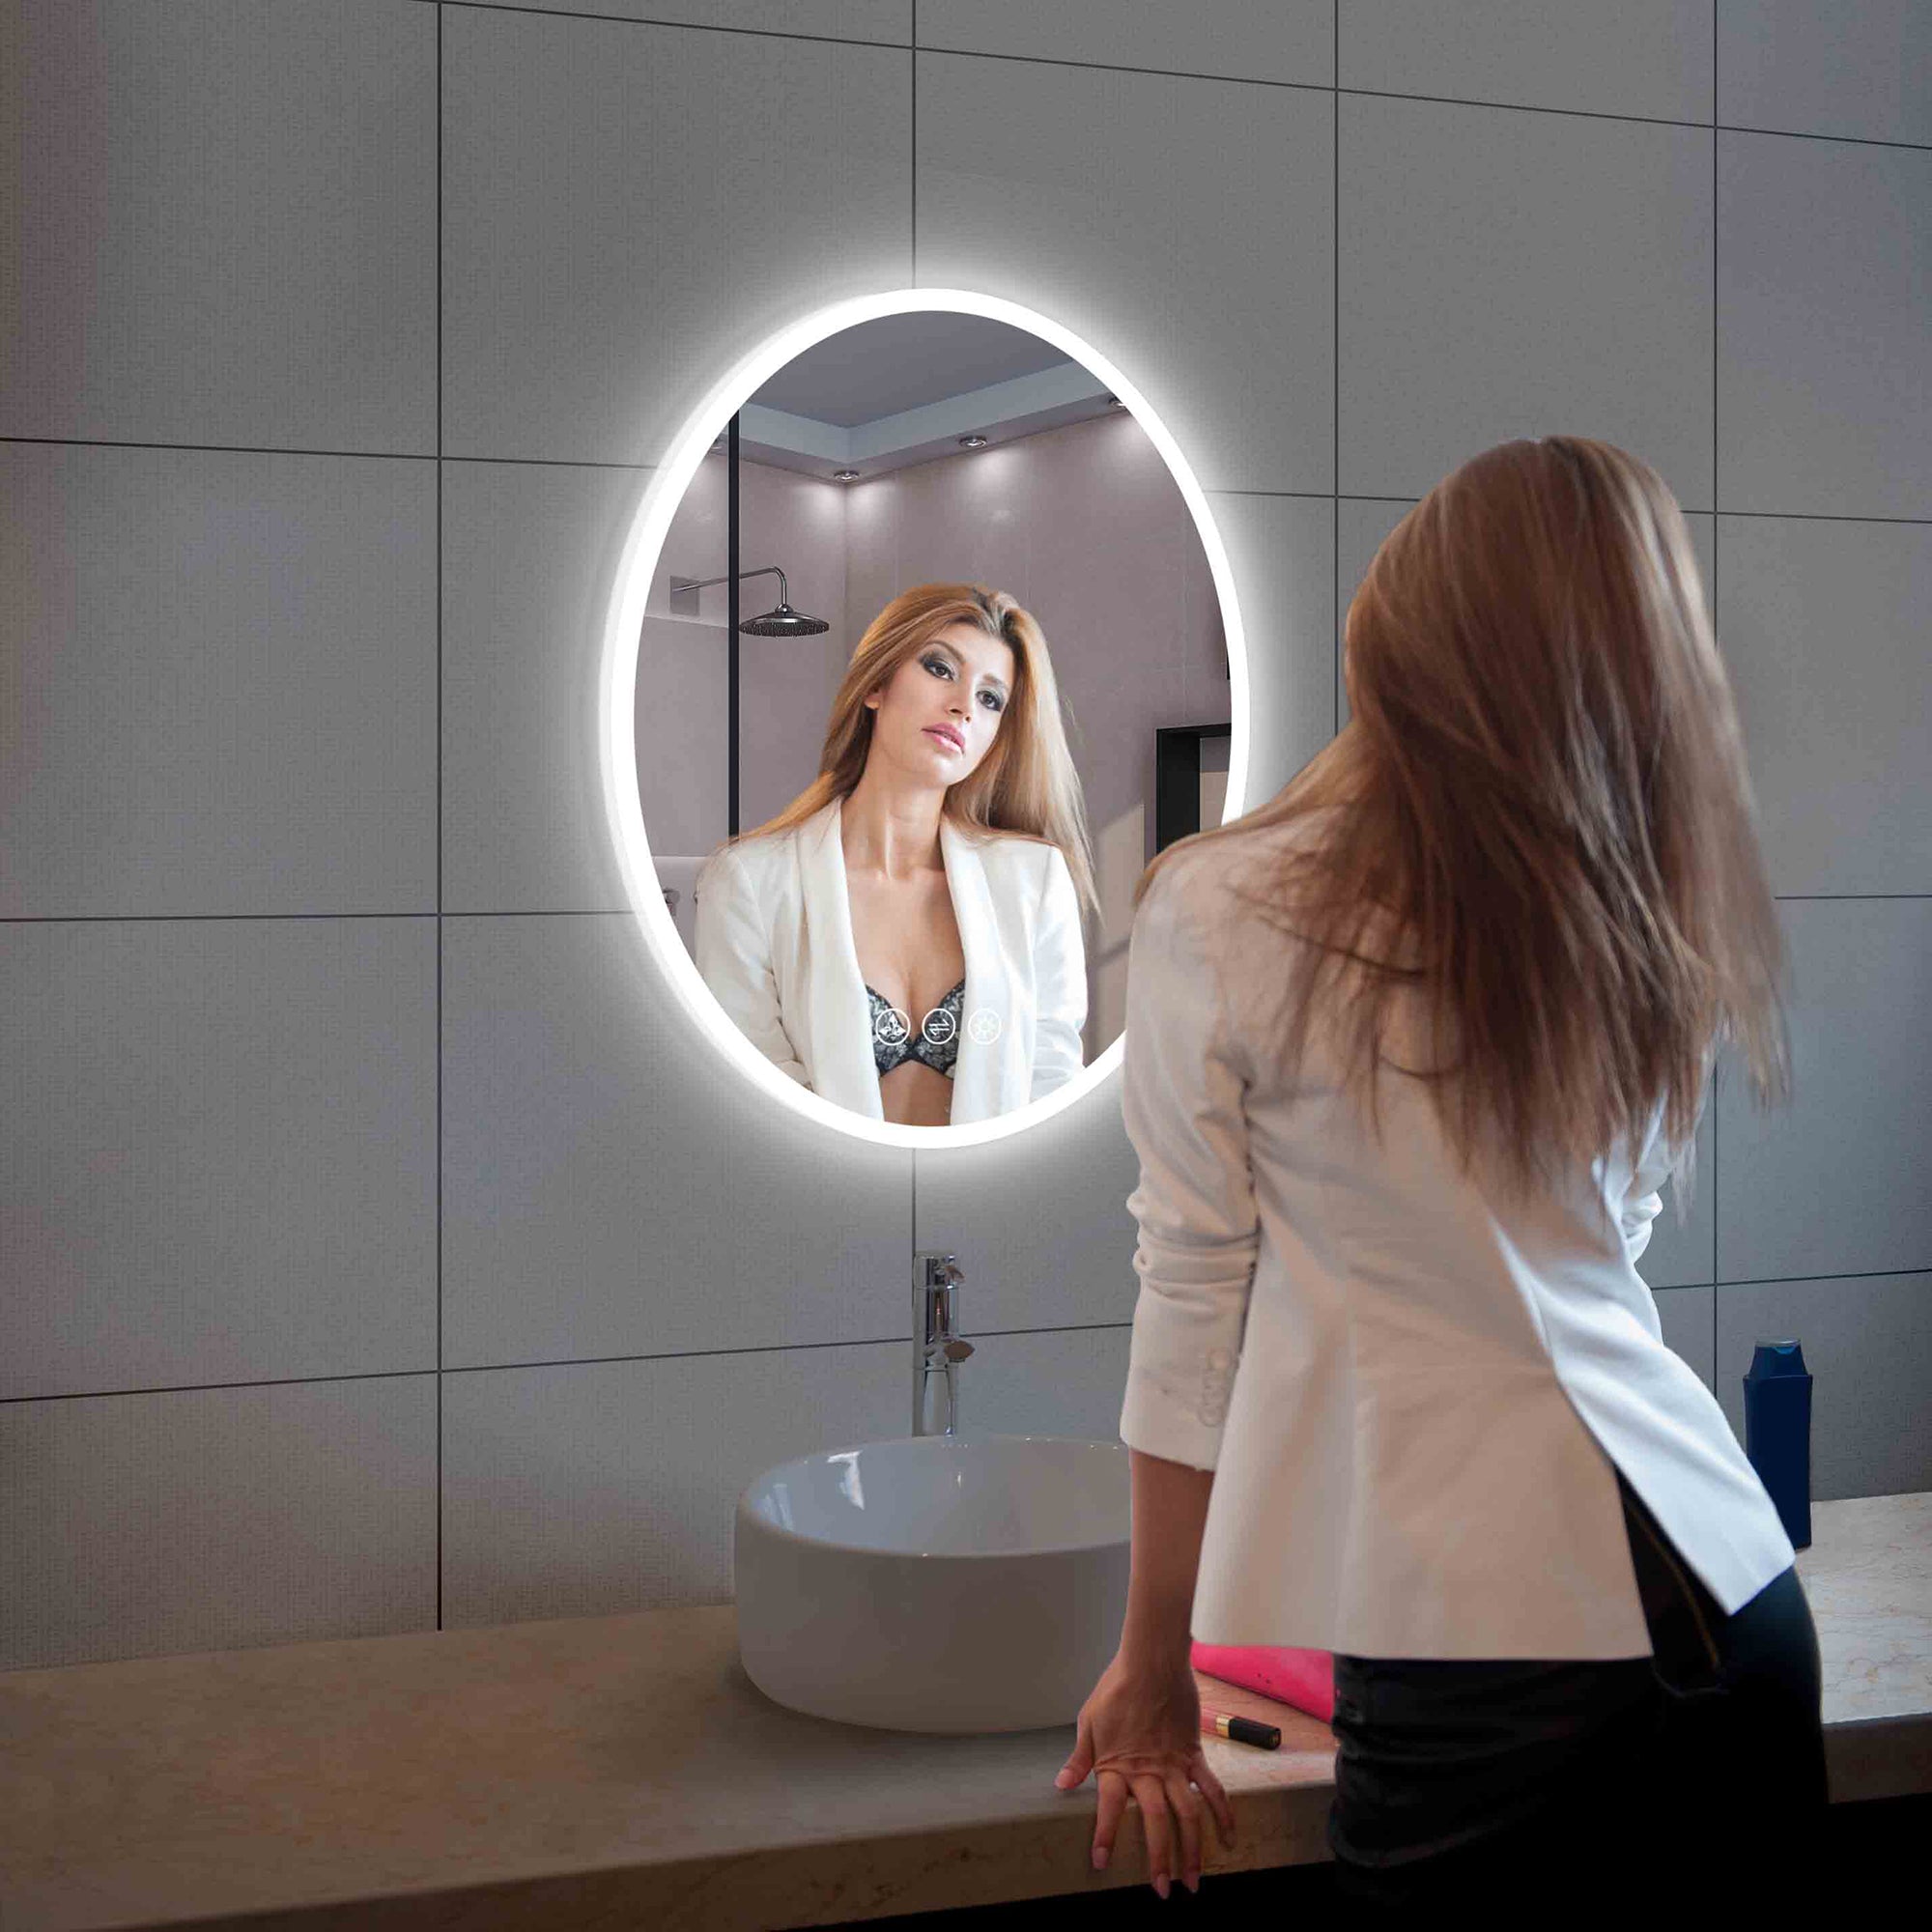 Oval 20" Oval LED Mirror